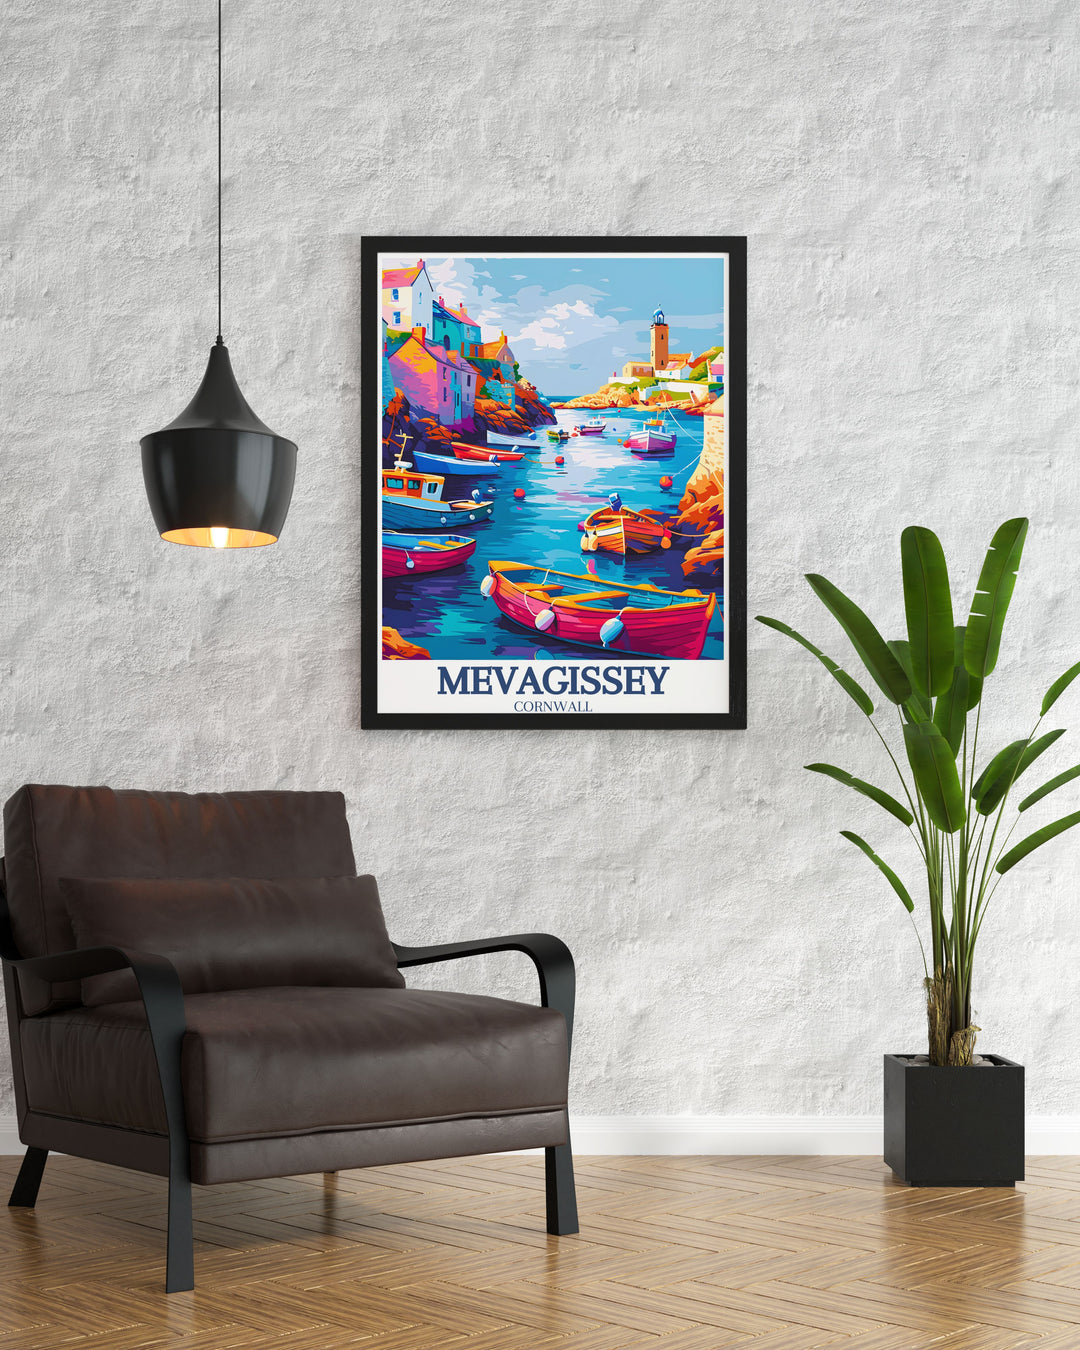 Mevagissey, located in Cornwall, is highlighted in this poster with its iconic Clock Tower and historical St. Peters Church. This artwork beautifully captures the villages unique landmarks and scenic beauty, making it a perfect piece for your home decor.